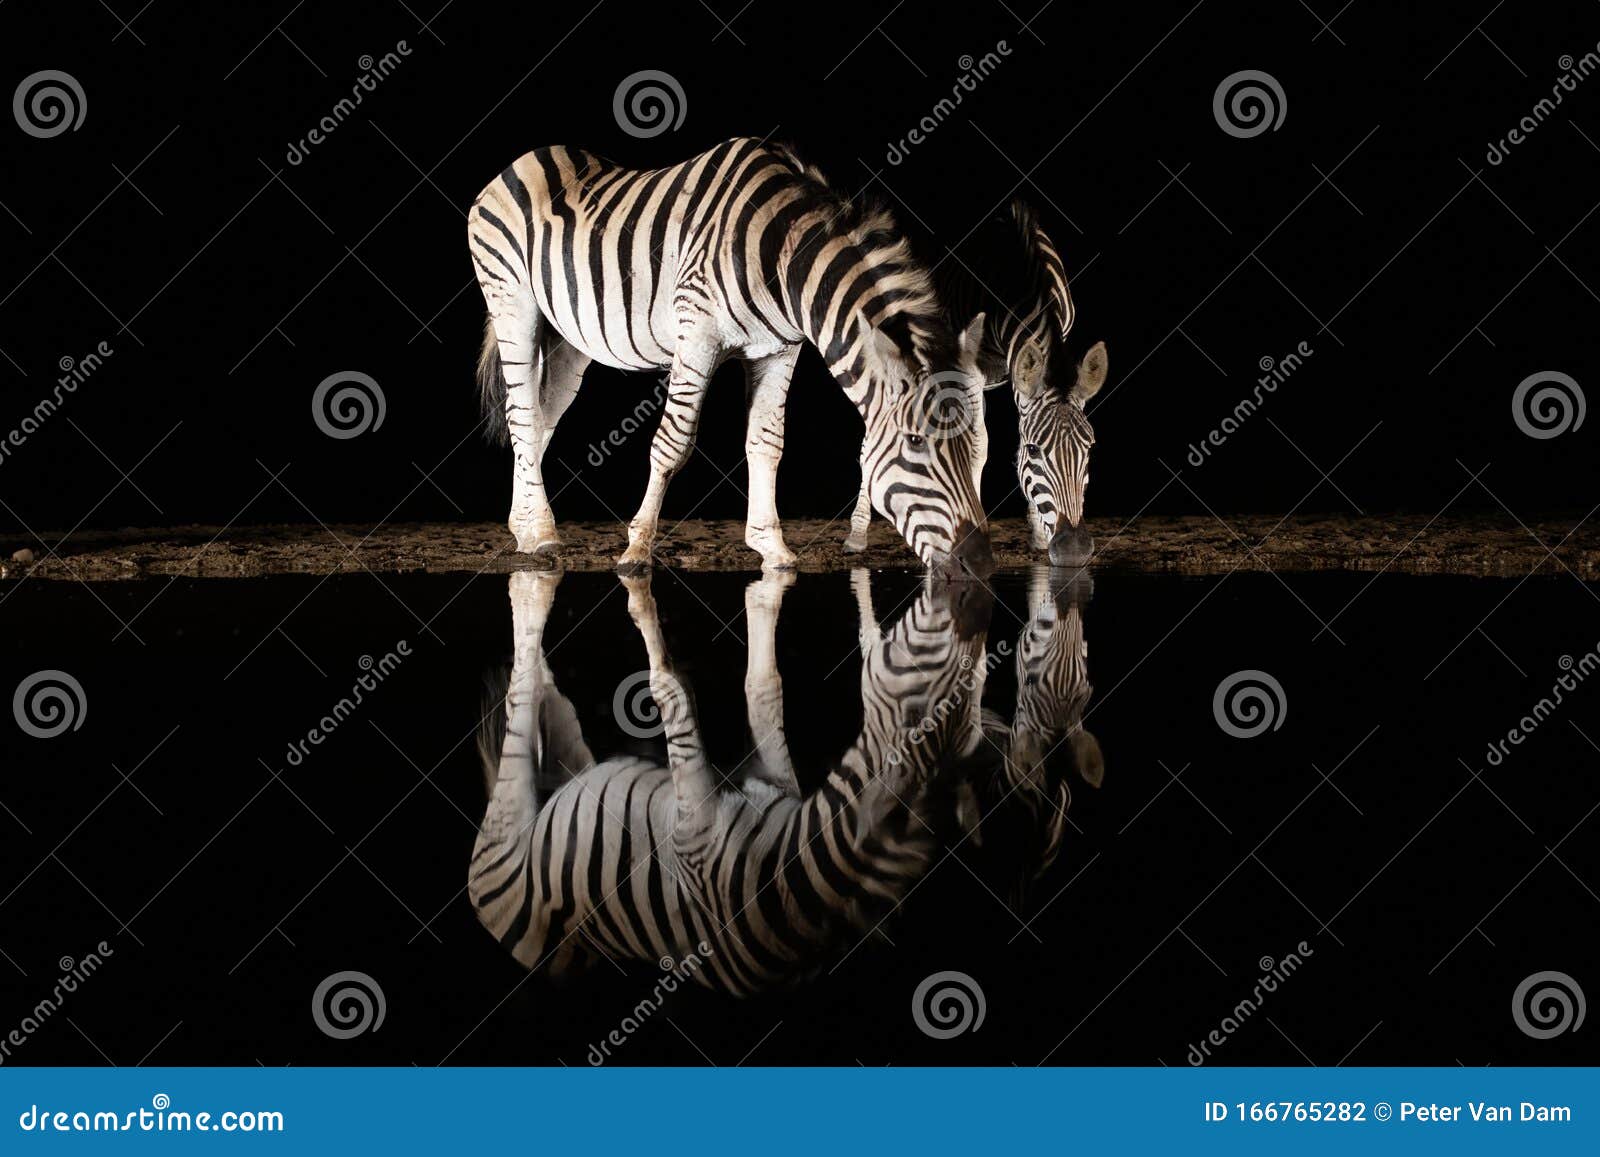 Two Zebras Drinking from a Pool in the Night Stock Photo - Image of